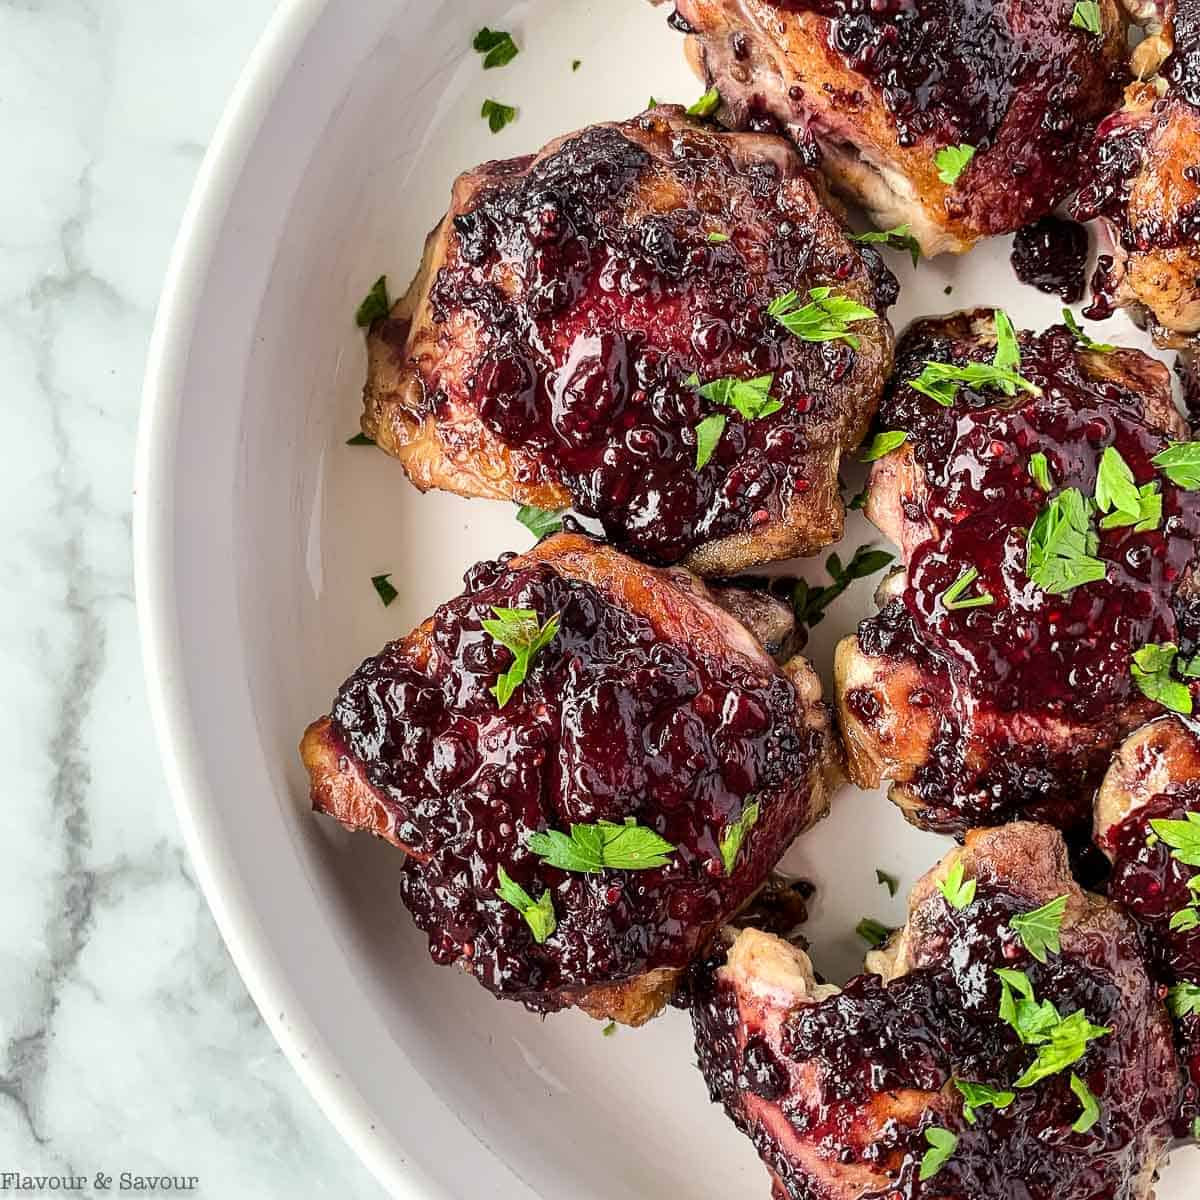 Blackberry glazed chicken thighs in a serving dish with fresh parsley.